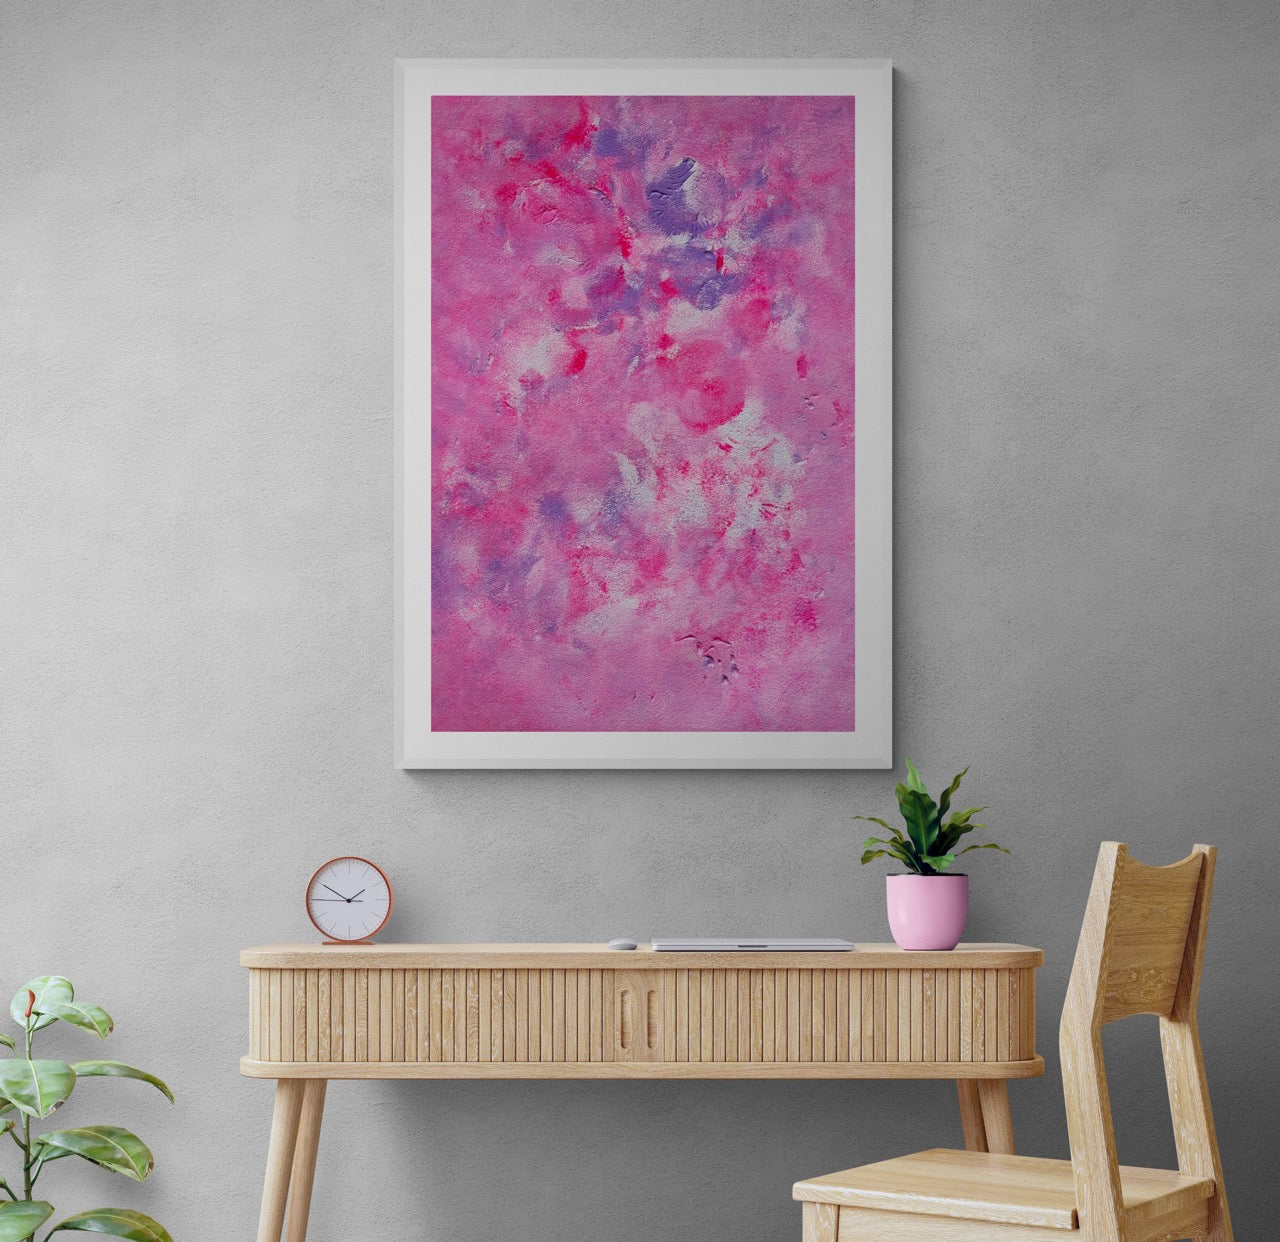 Pink, purple and white abstract art poster with a white frame hanging vertically on a light grey wall over a working desk. The room is an office and the furniture is of light oak. 